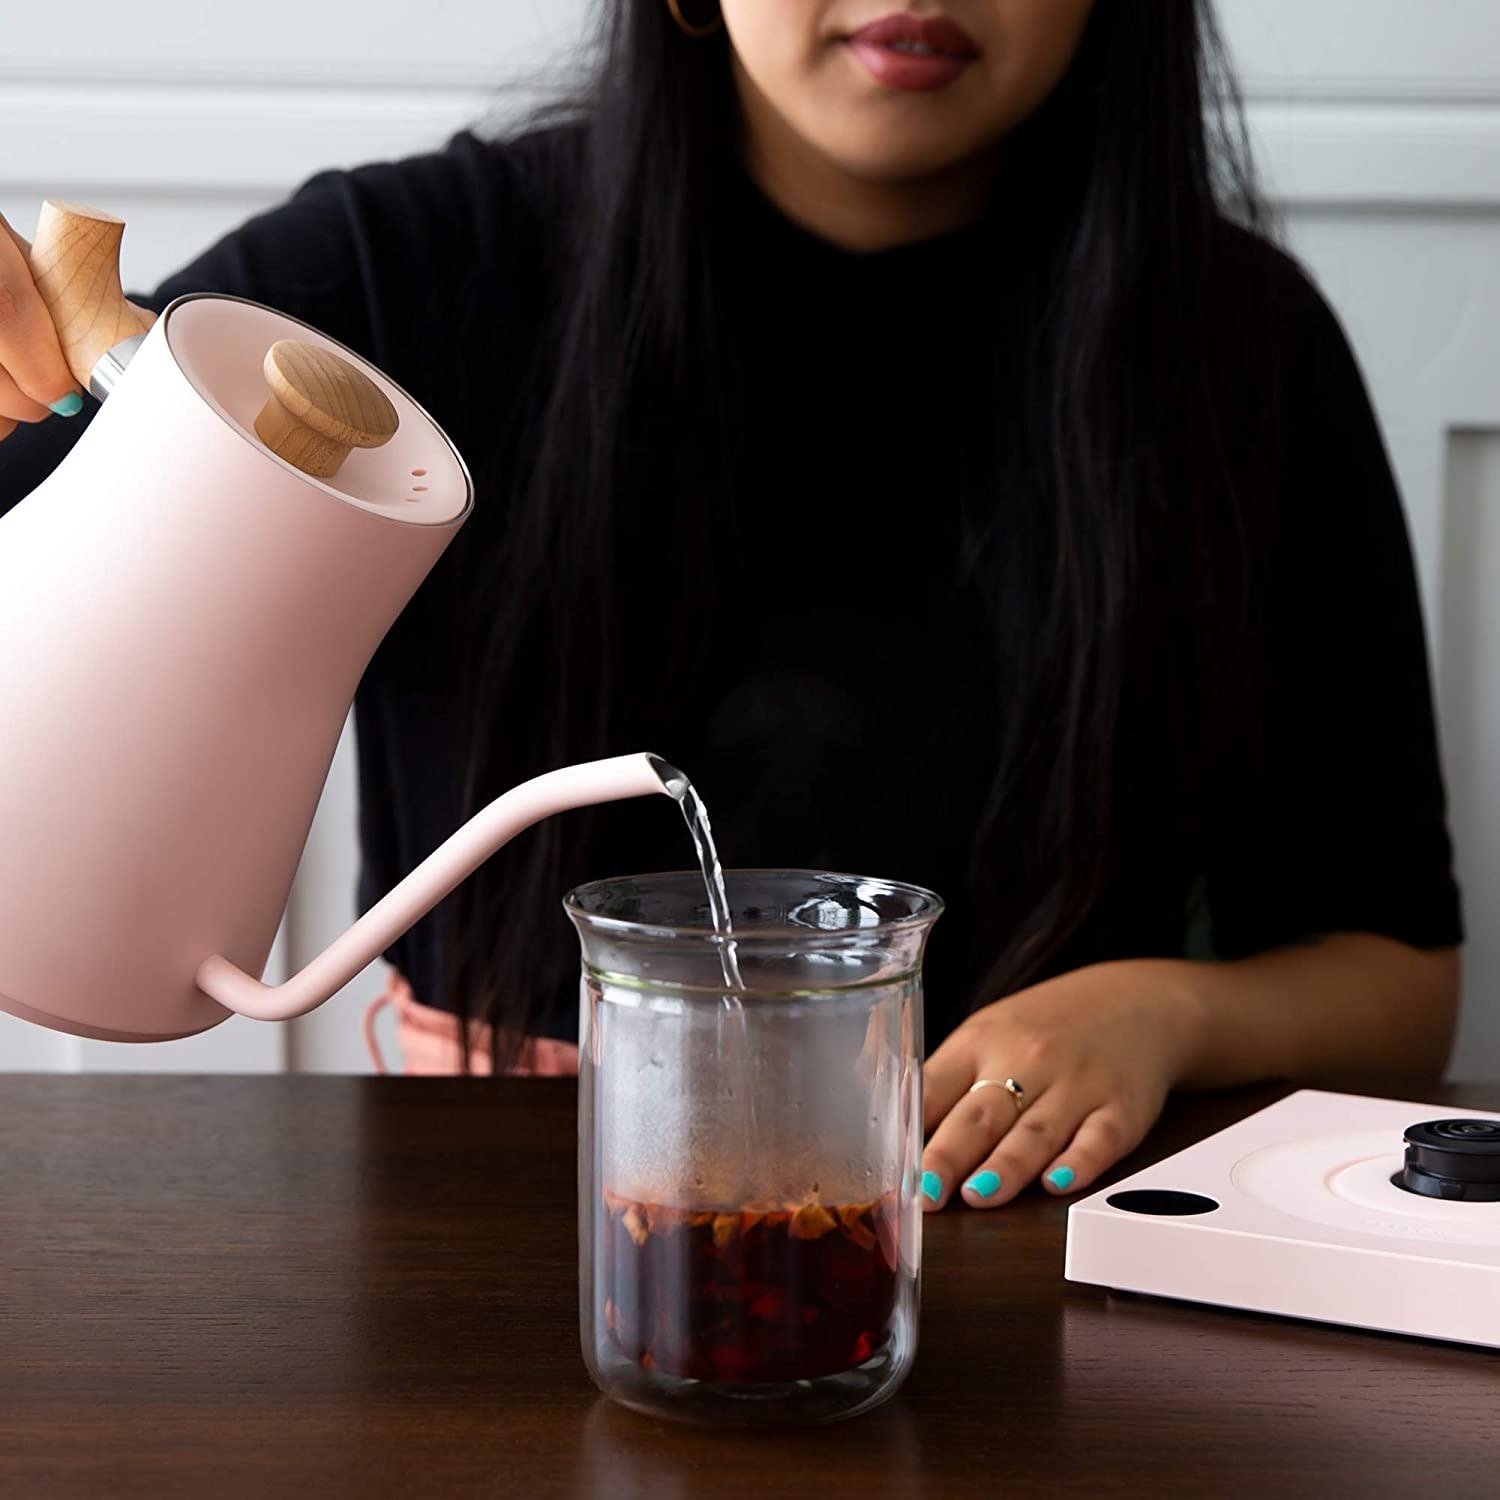 a model pouring water from the pink electric kettle